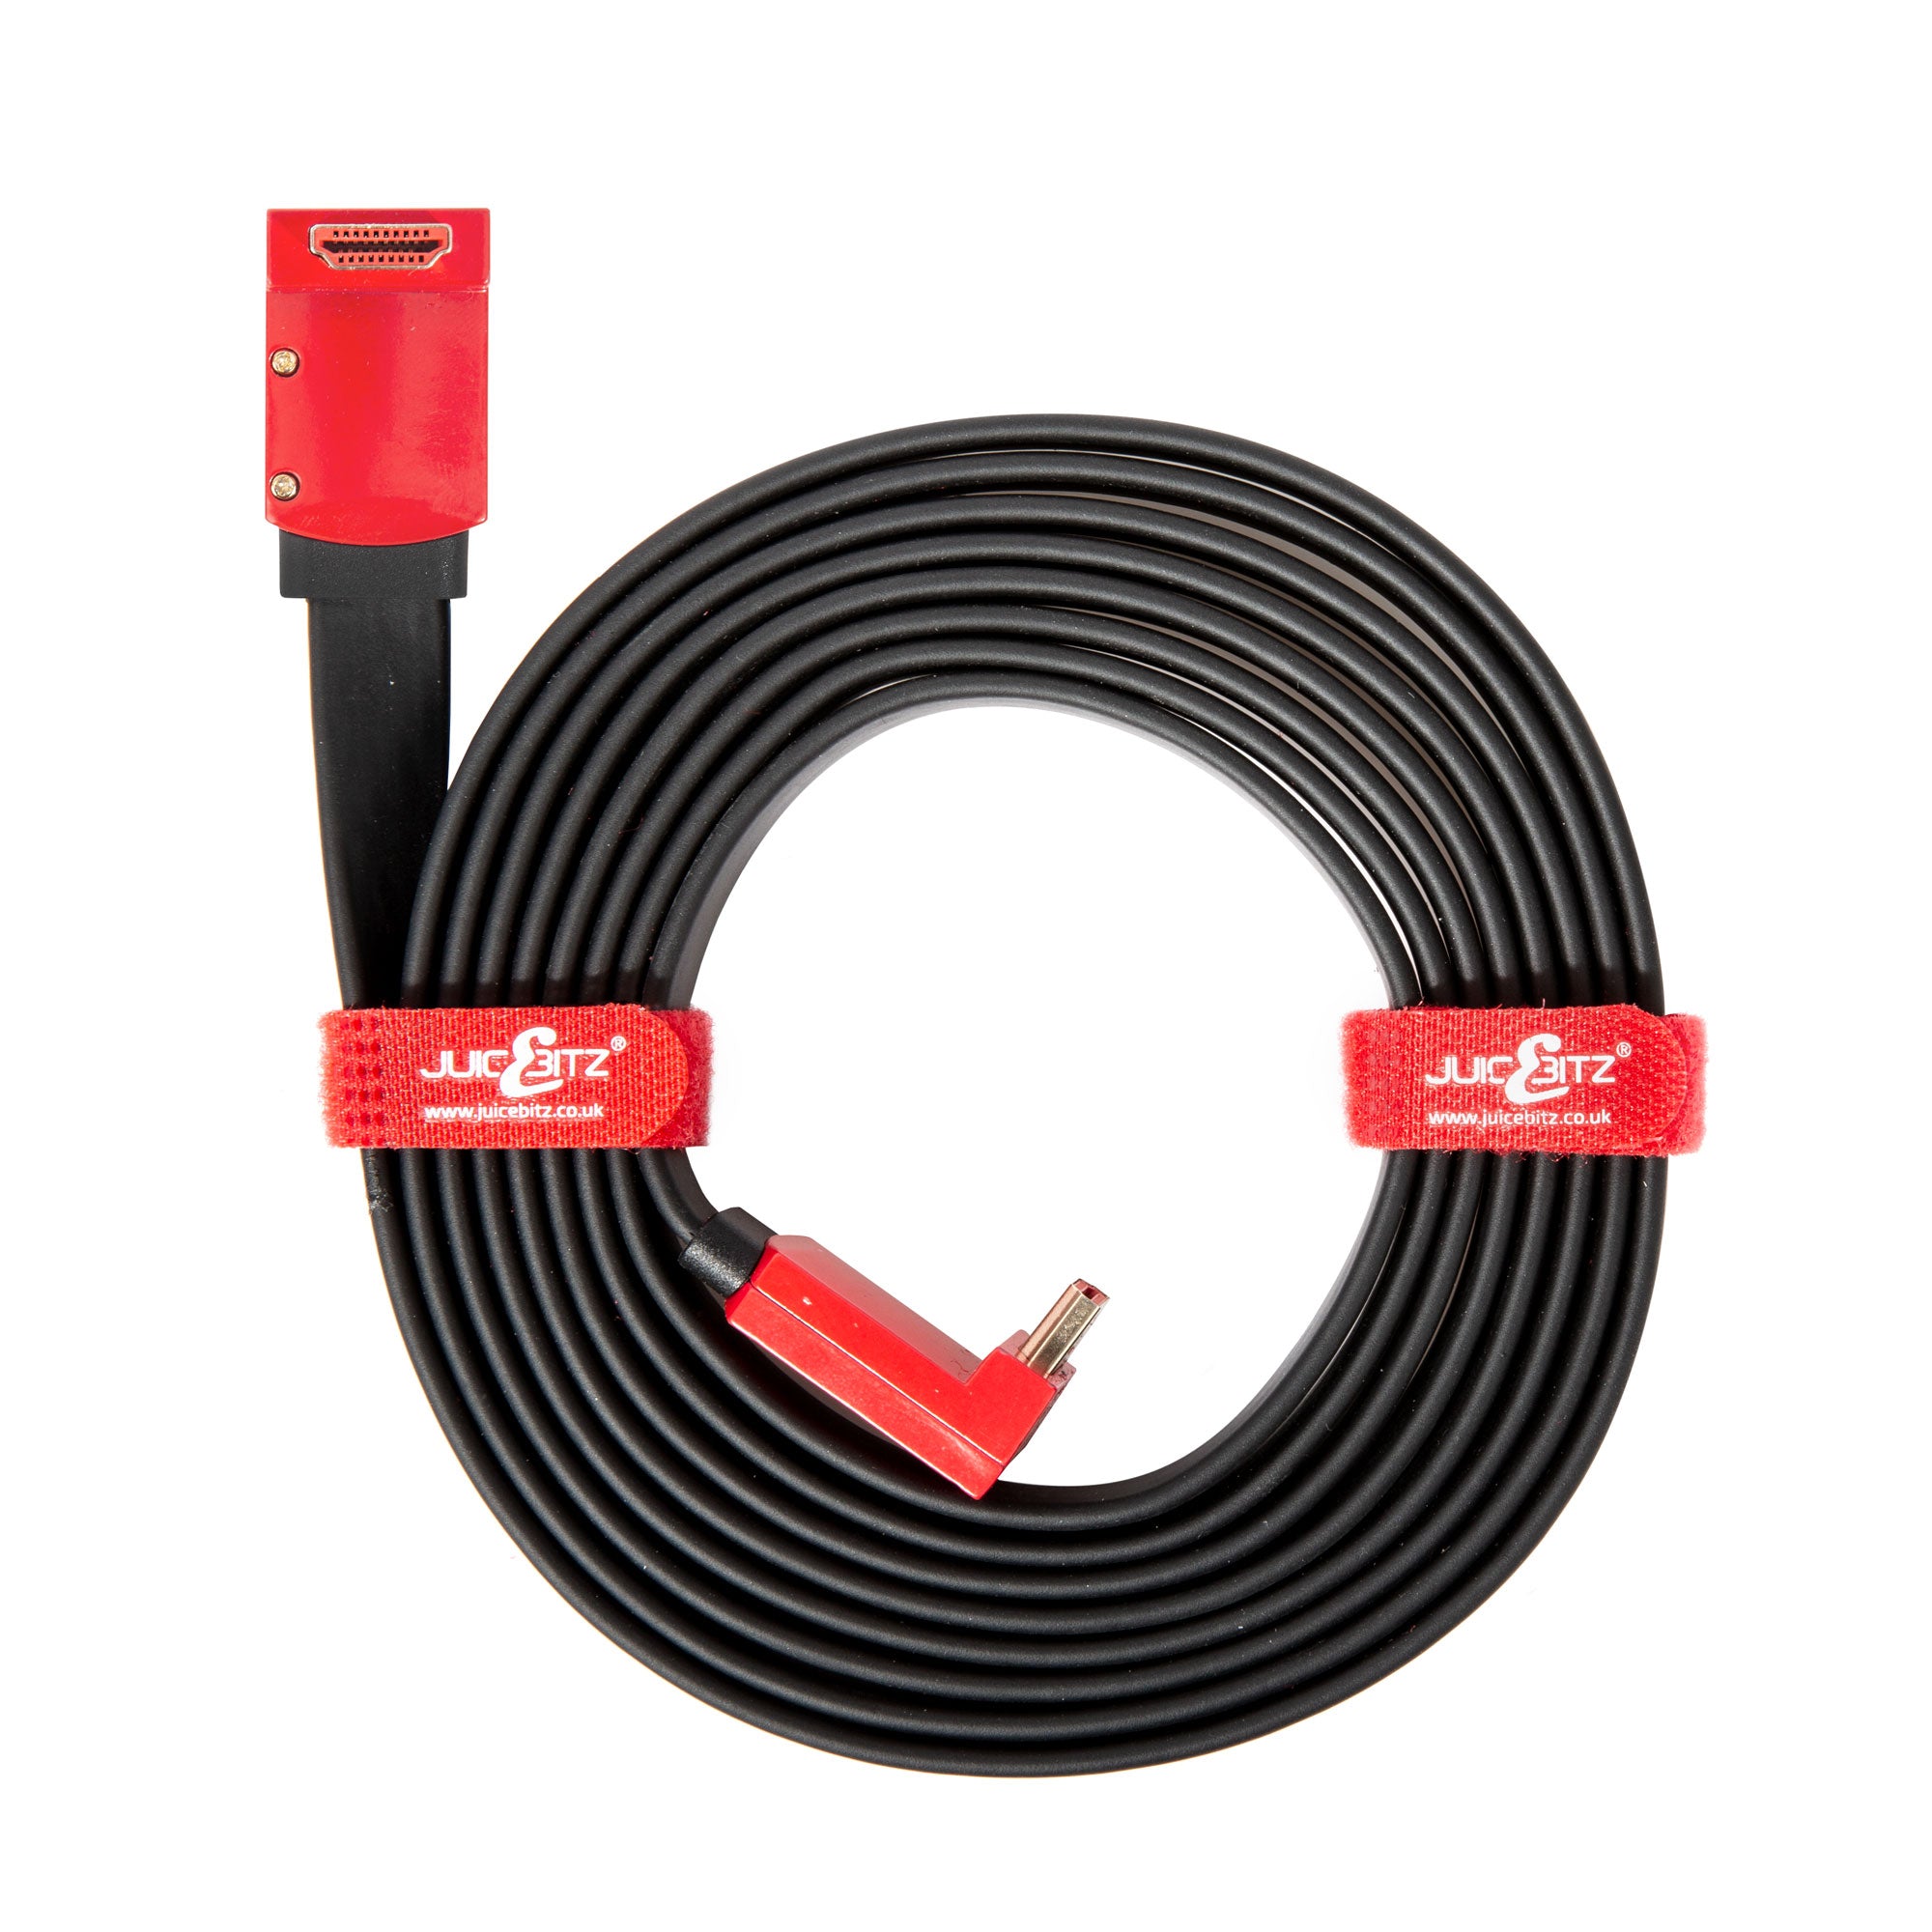 Flat HDMI v2.0 4k 60fps Ultra HD High Speed Cable HDR Graphics, Angled Connectors